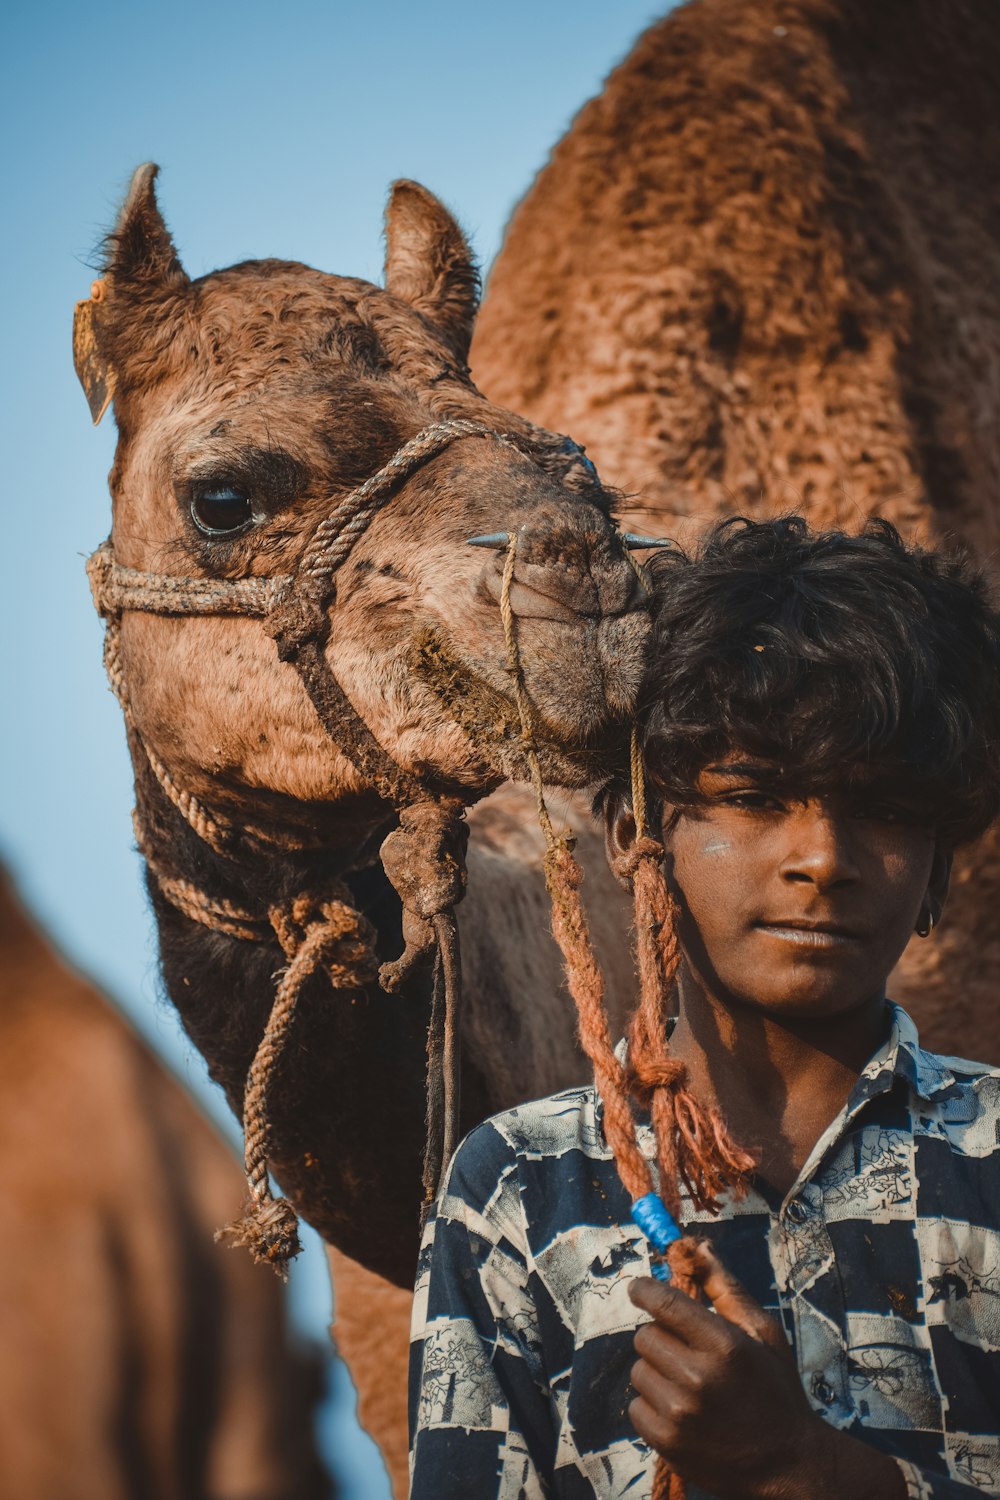 boy in blue and white plaid shirt standing beside brown camel during daytime